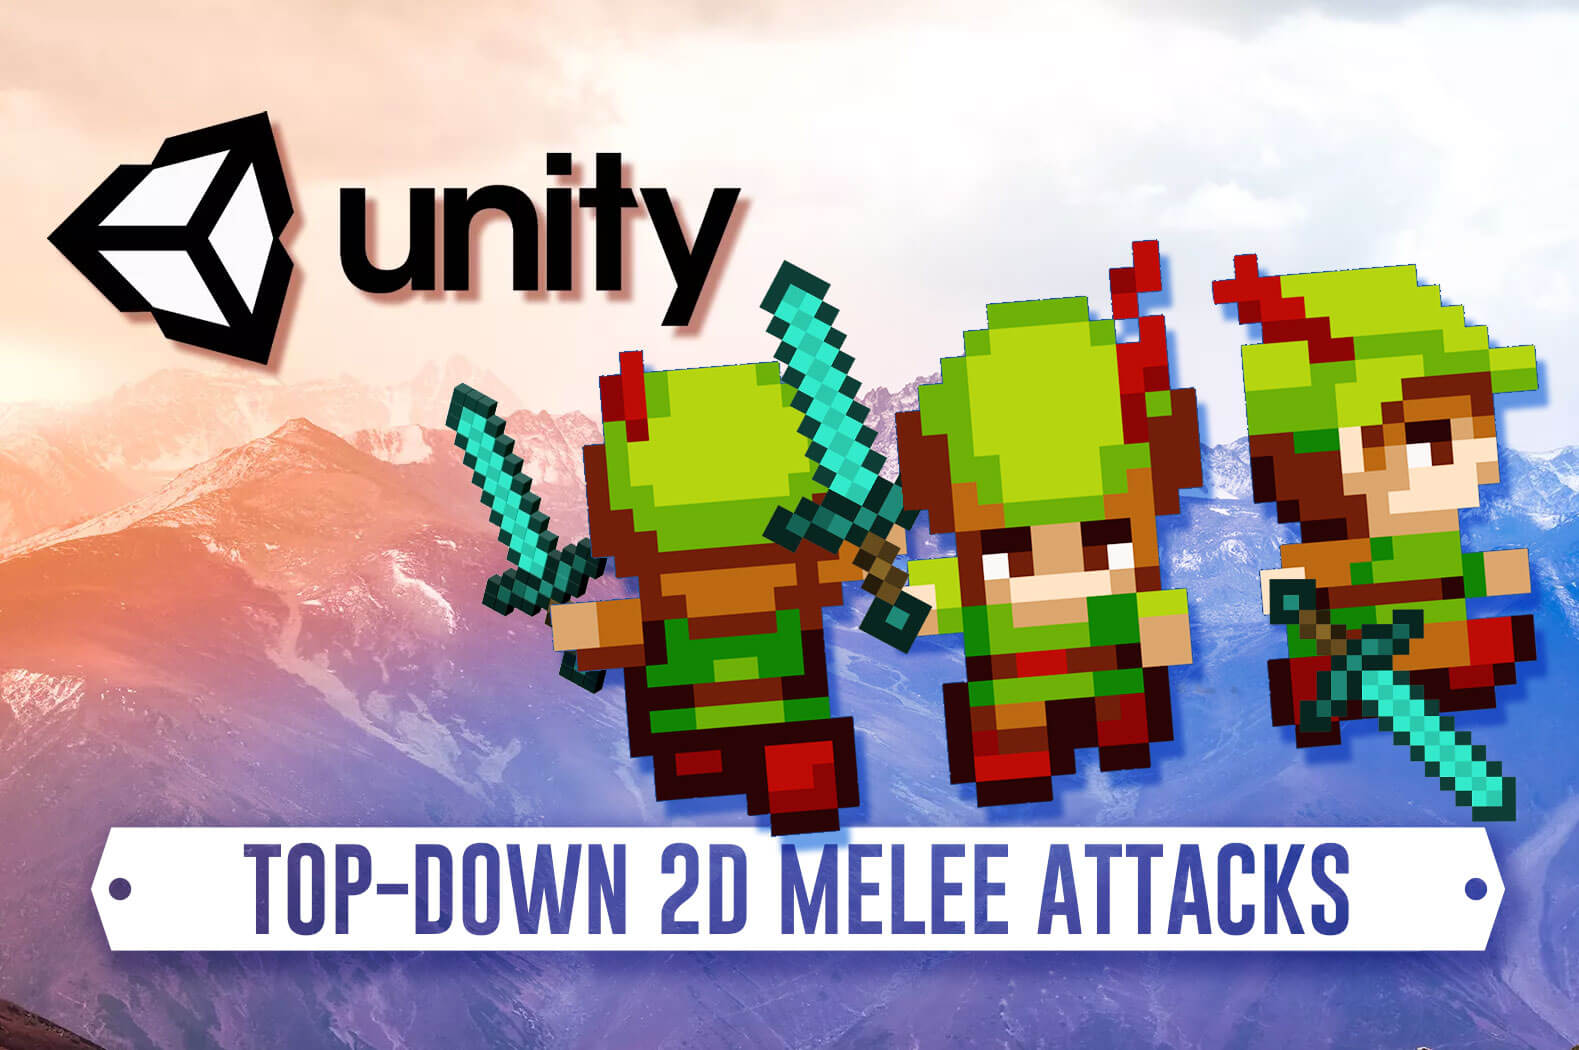 How To Do 2D Melee Combat in Unity 2019